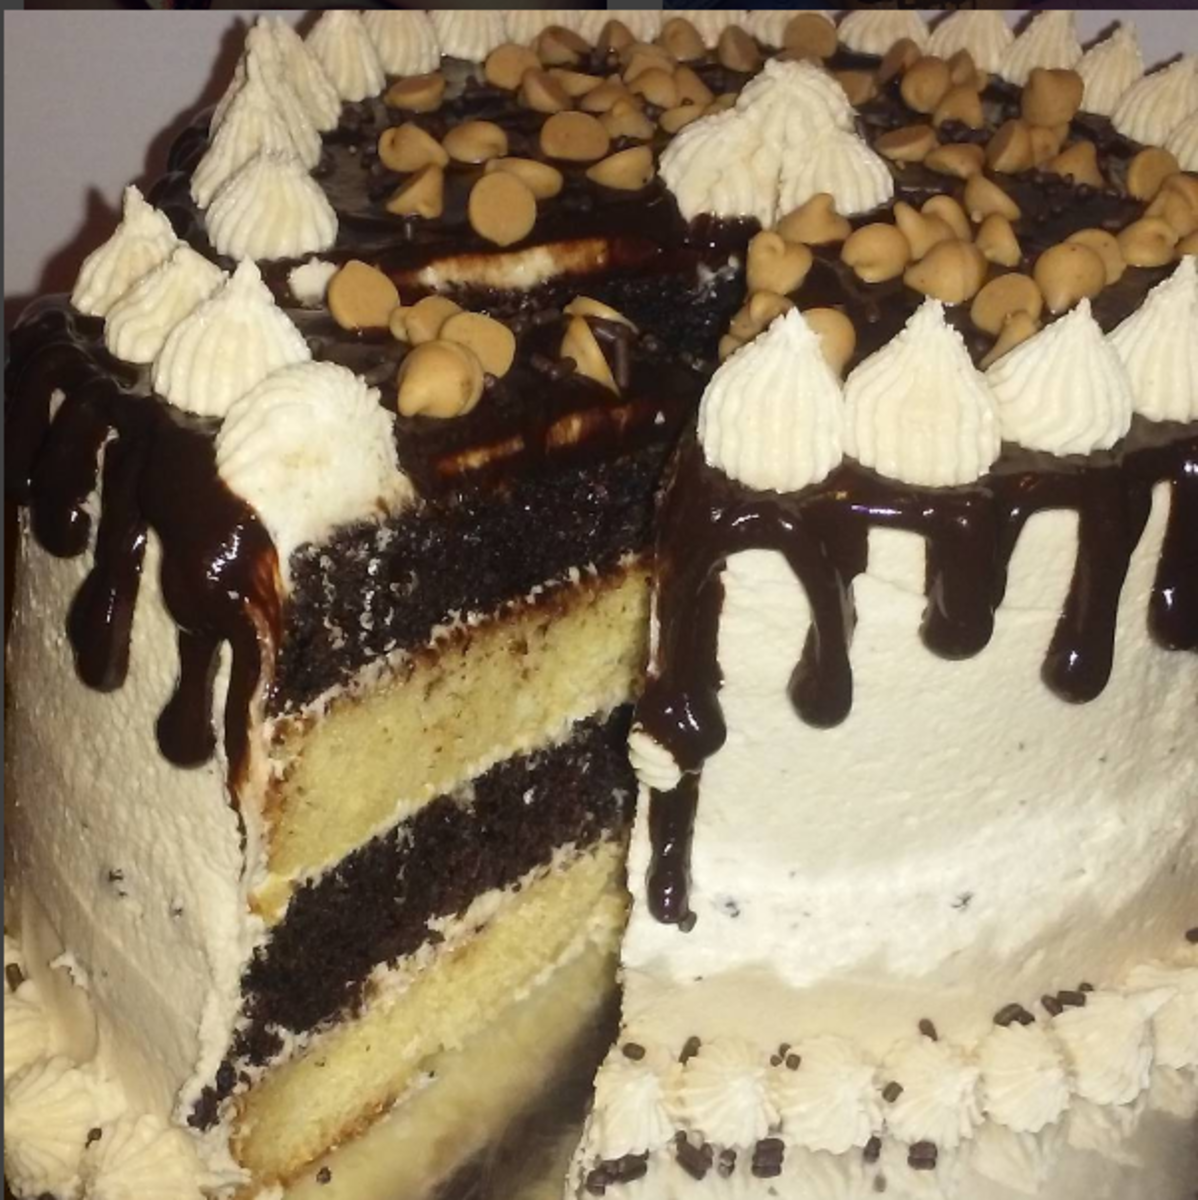 This is the peanut butter cup cake I mention below, using the vanilla base cake I'm sharing.